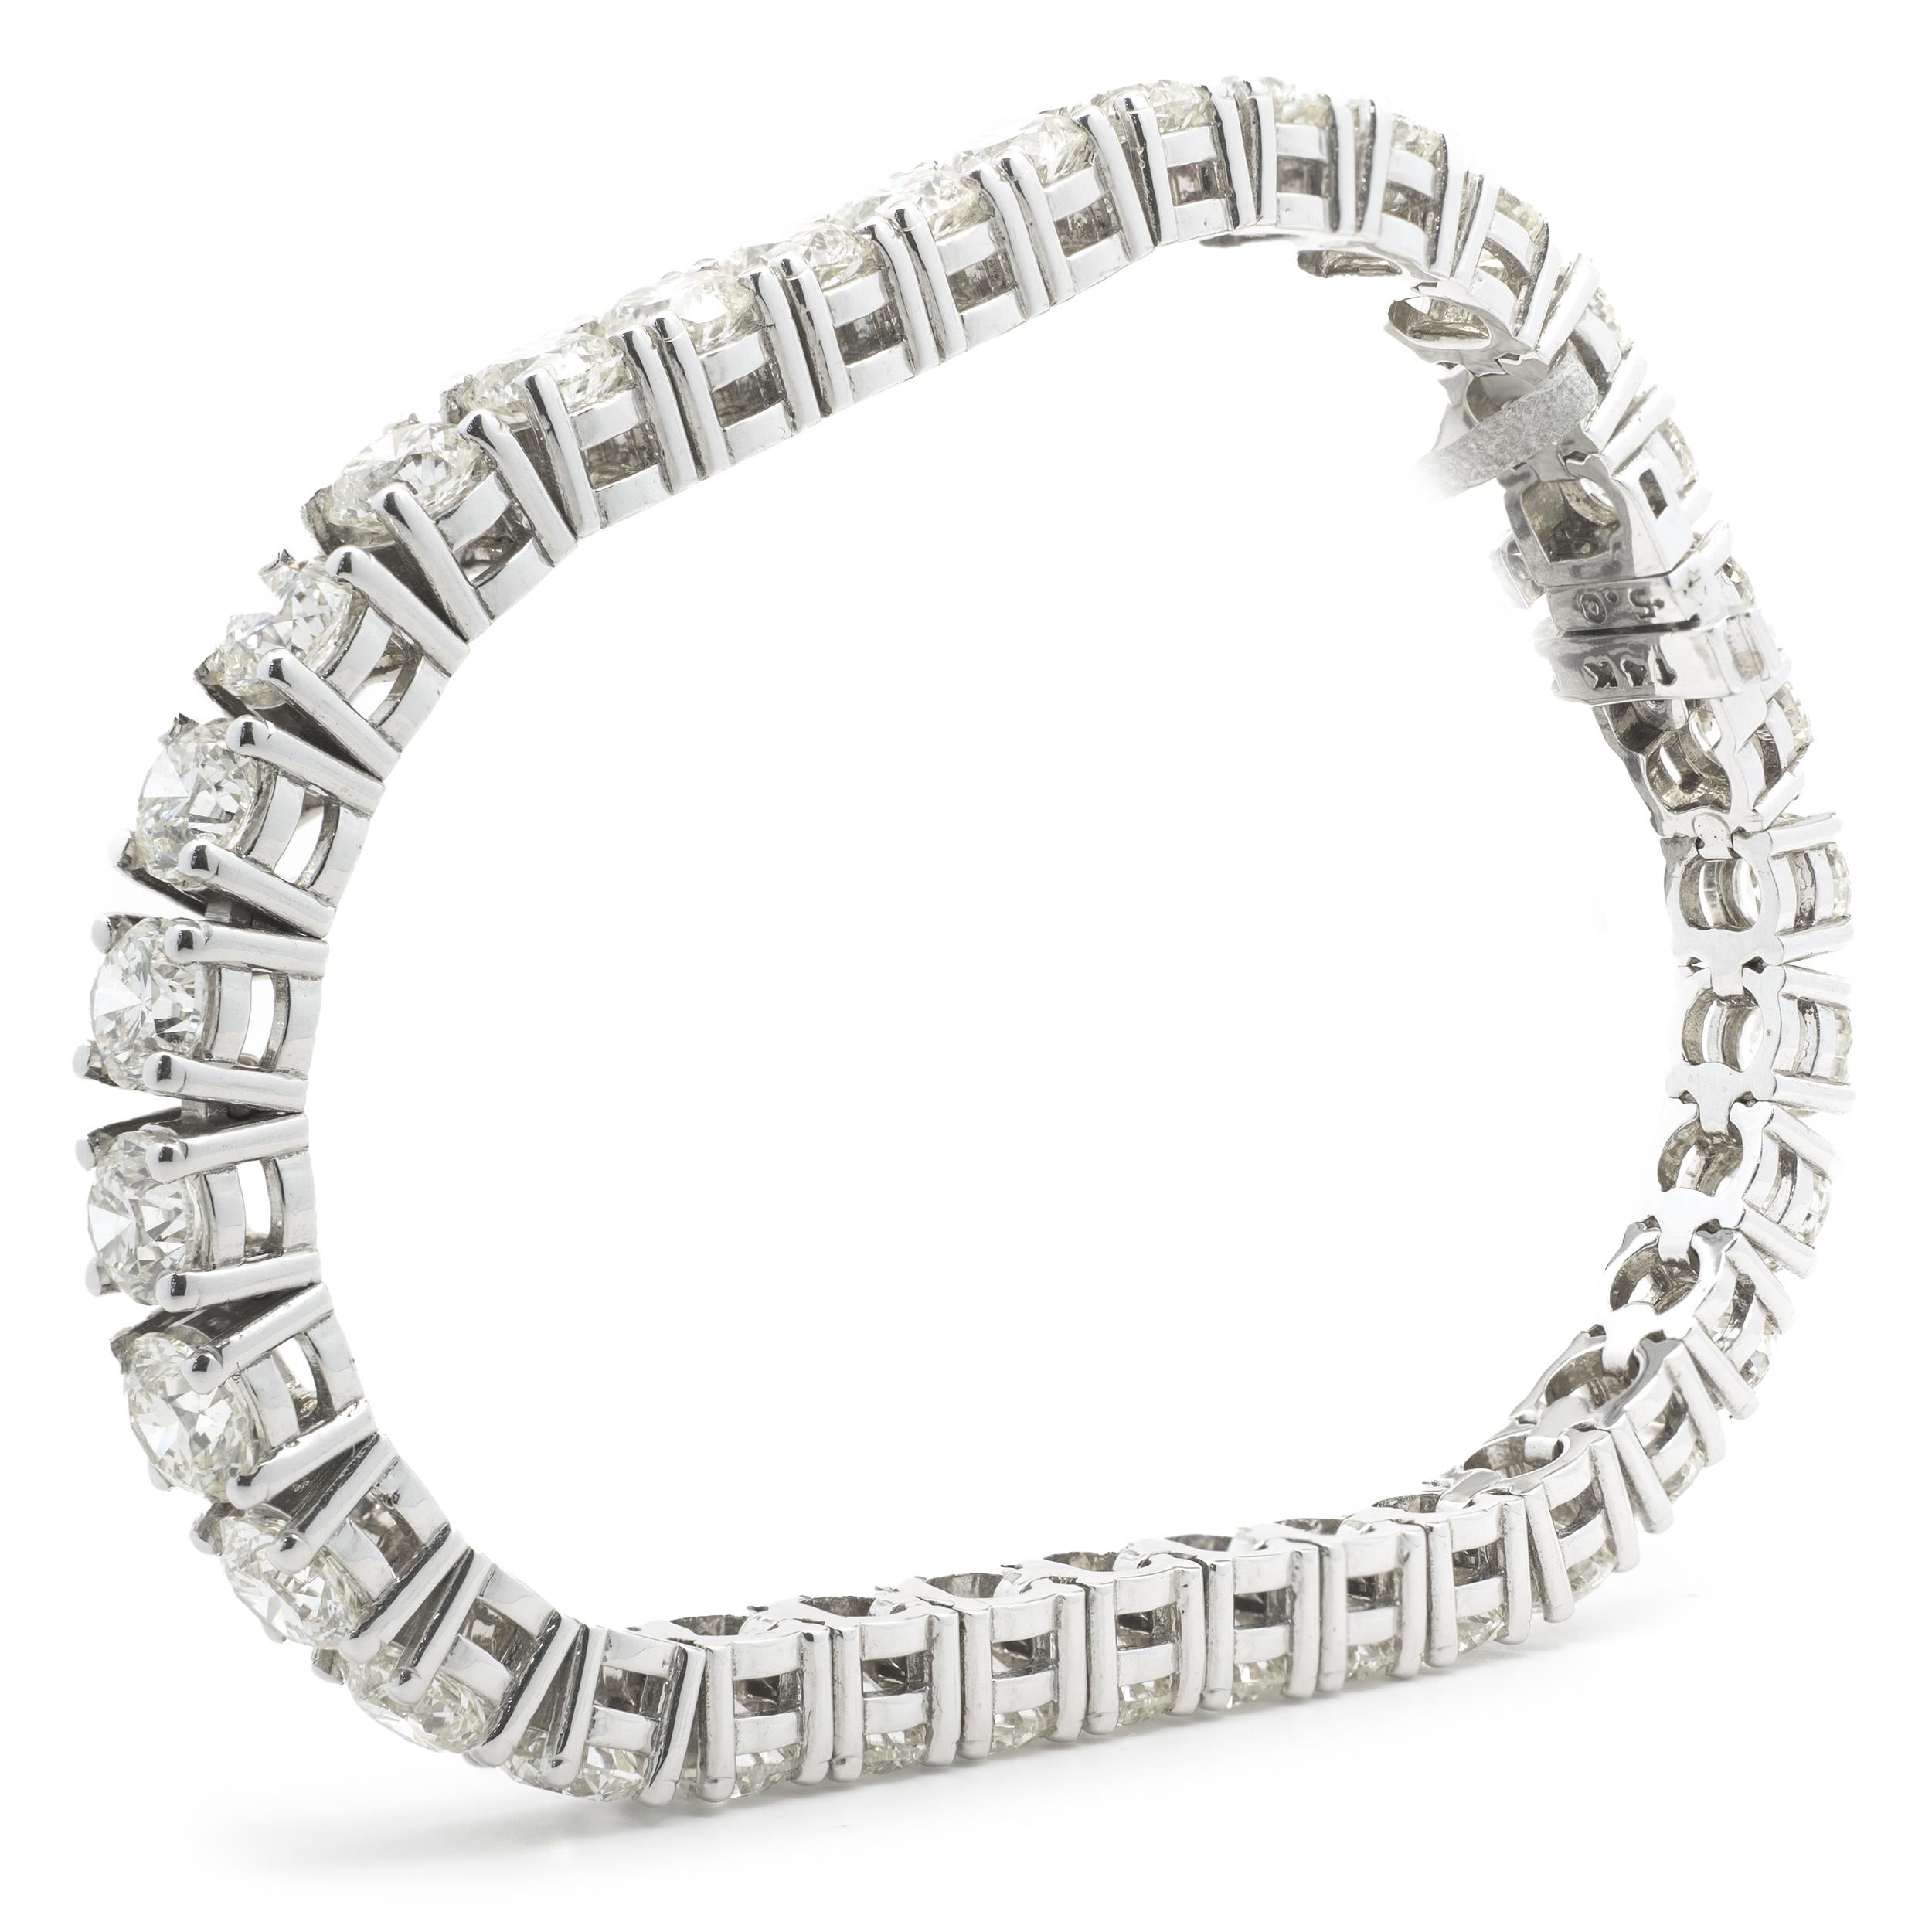 Designer: custom
Material: 14K white gold
Diamonds: 32 round brilliant cut = 17.69cttw
Color: G/H
Clarity: VS1-2
Dimensions: bracelet will fit up to an 7-inch wrist
Weight: 25.82 grams
